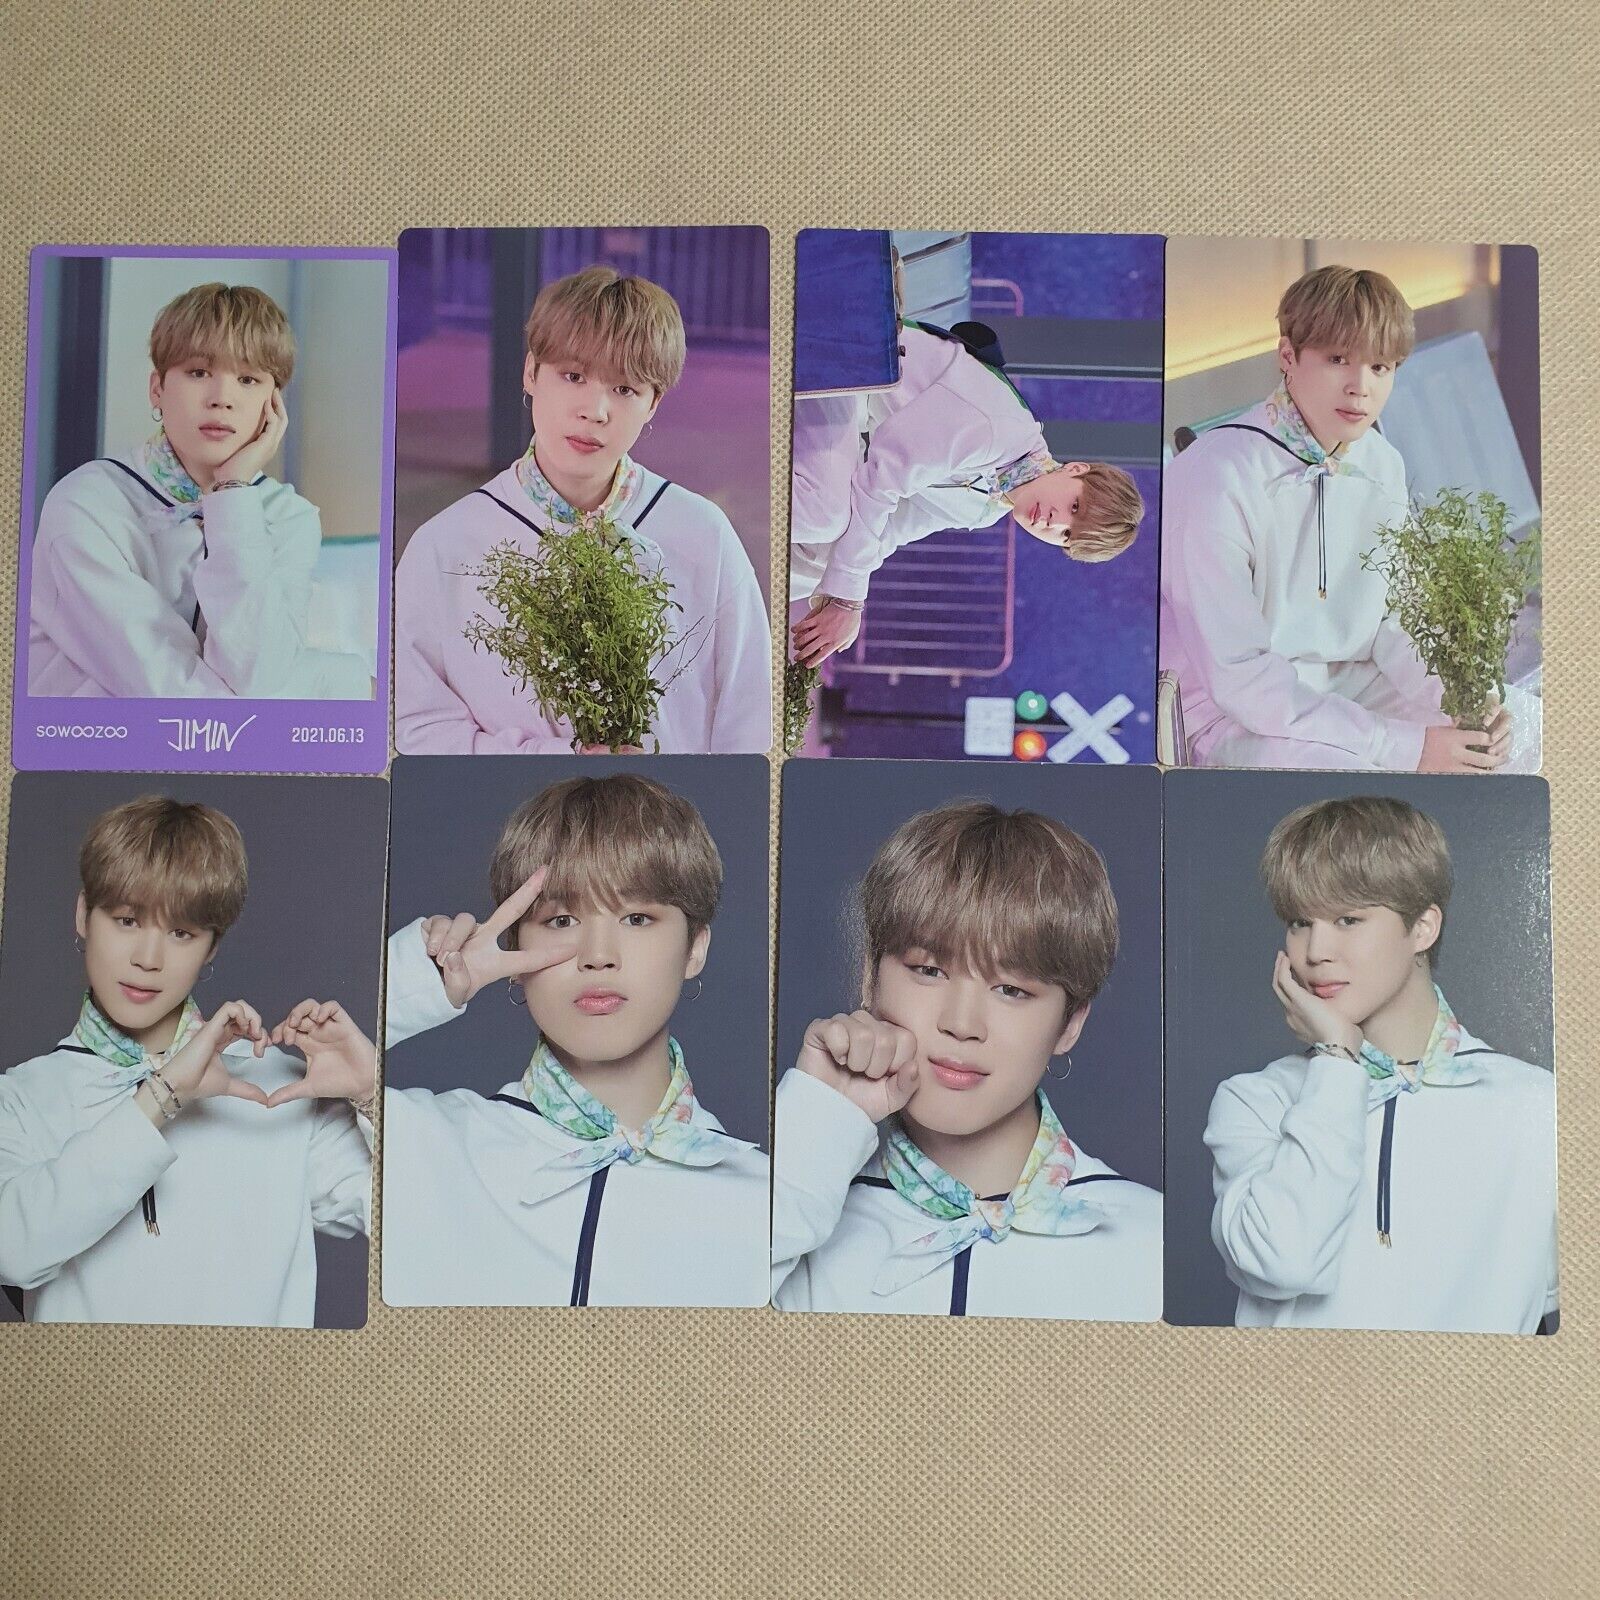 BTS- SOWOOZOO 2021 Muster Official Mini 8 Photocard collection set - JIMIN  | eBay